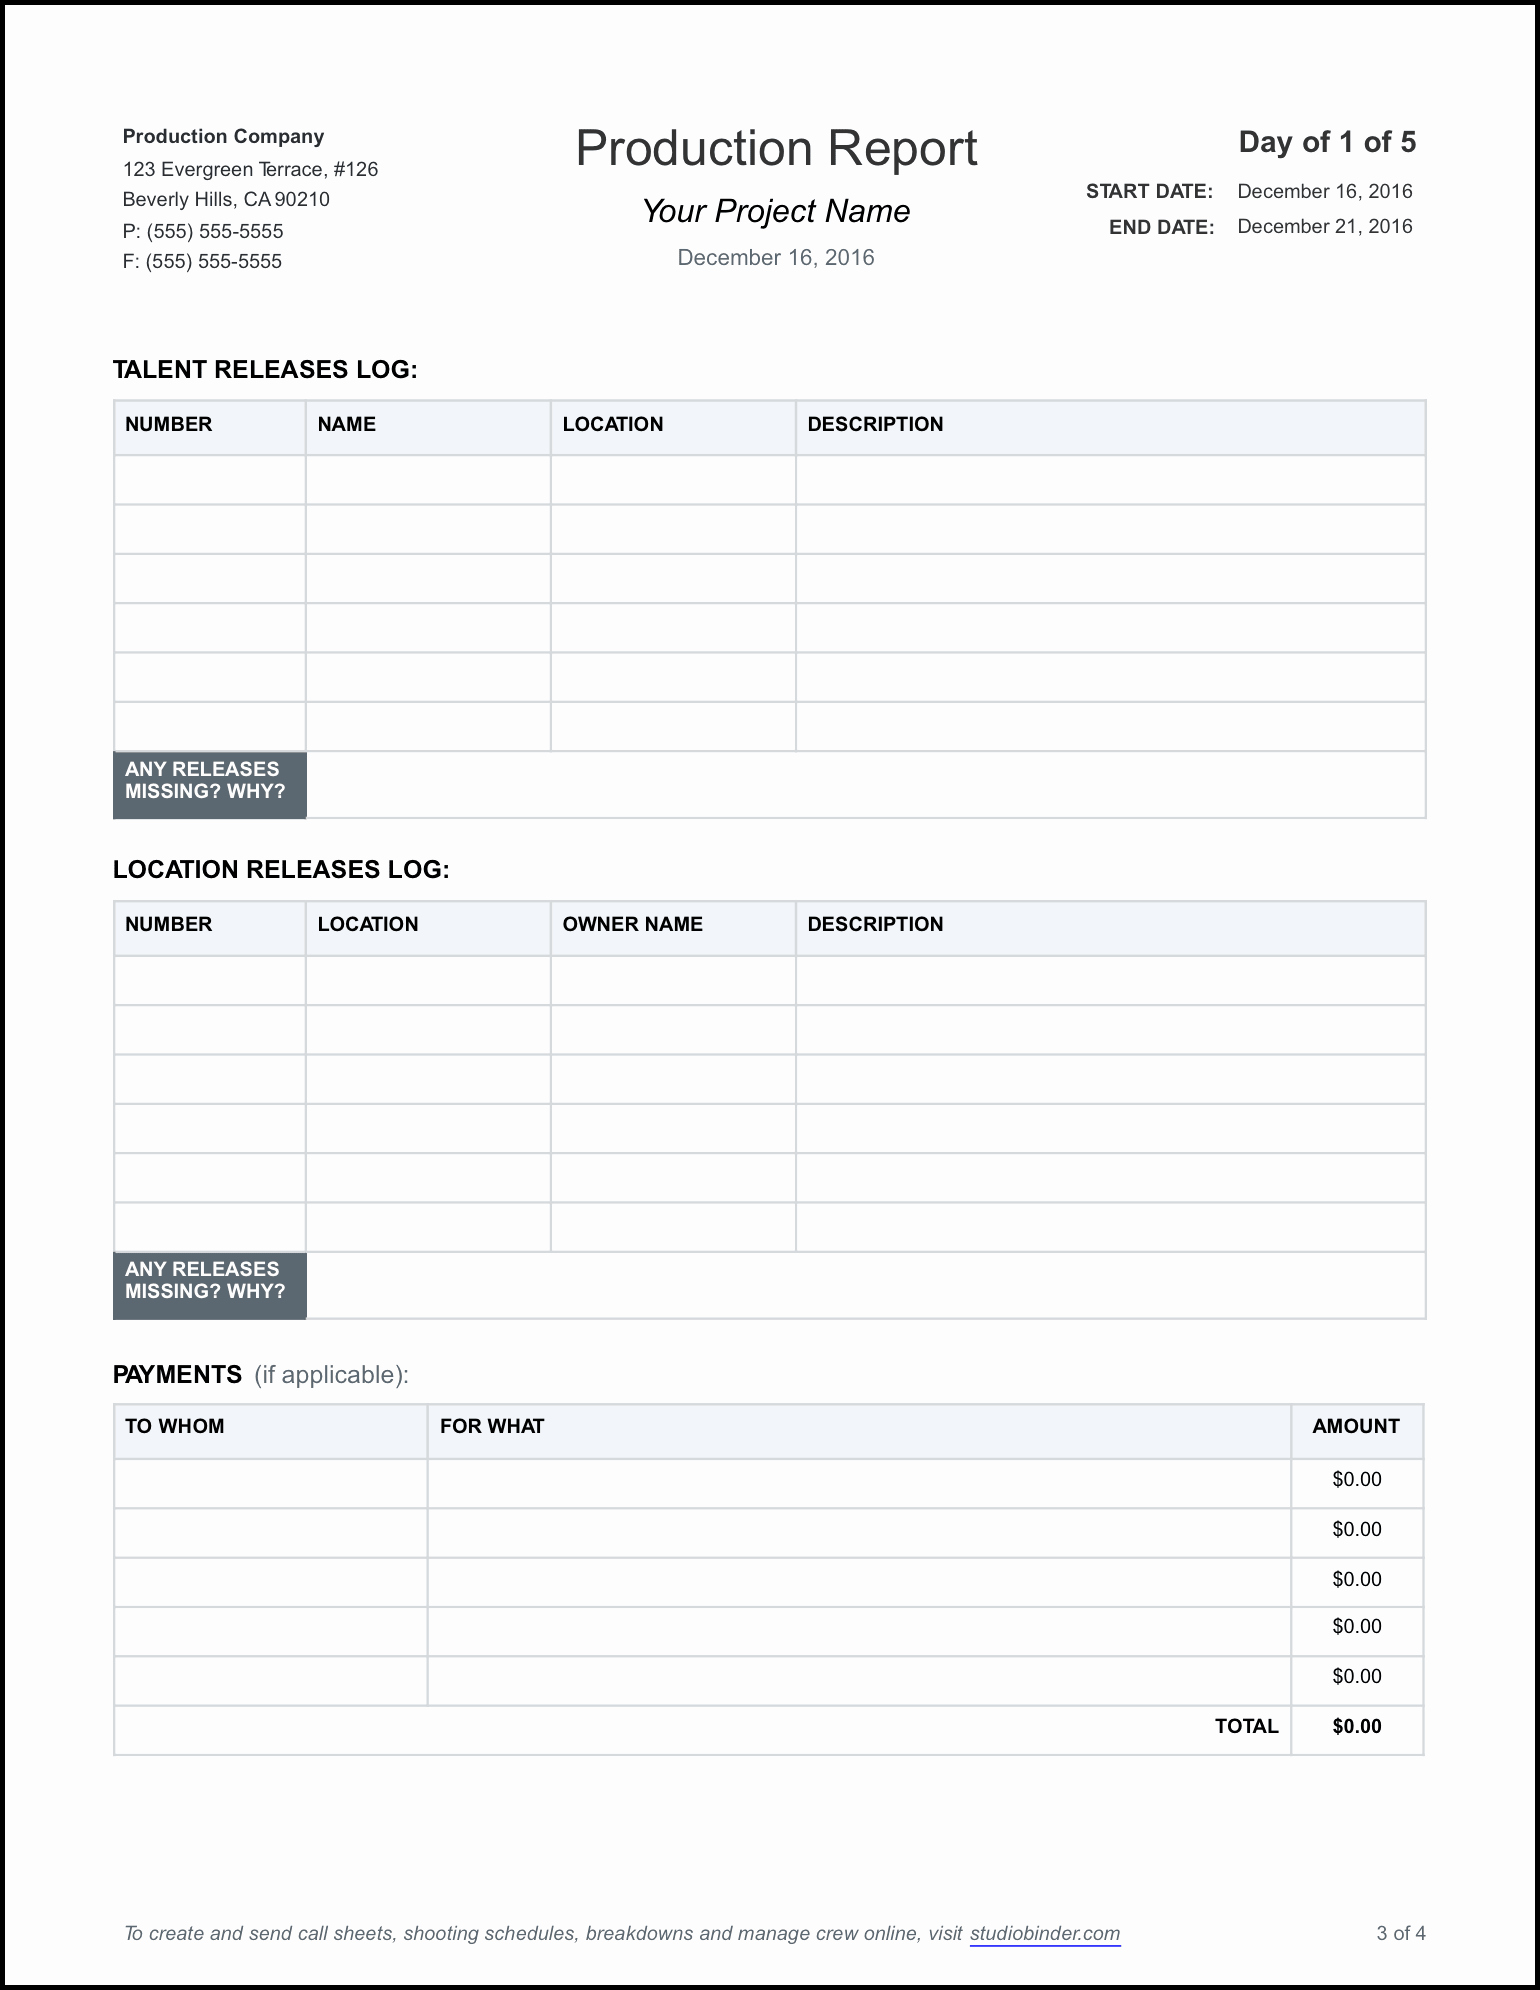 Daily Production Report Template Excel Best Of Download Free Daily Production Report Template